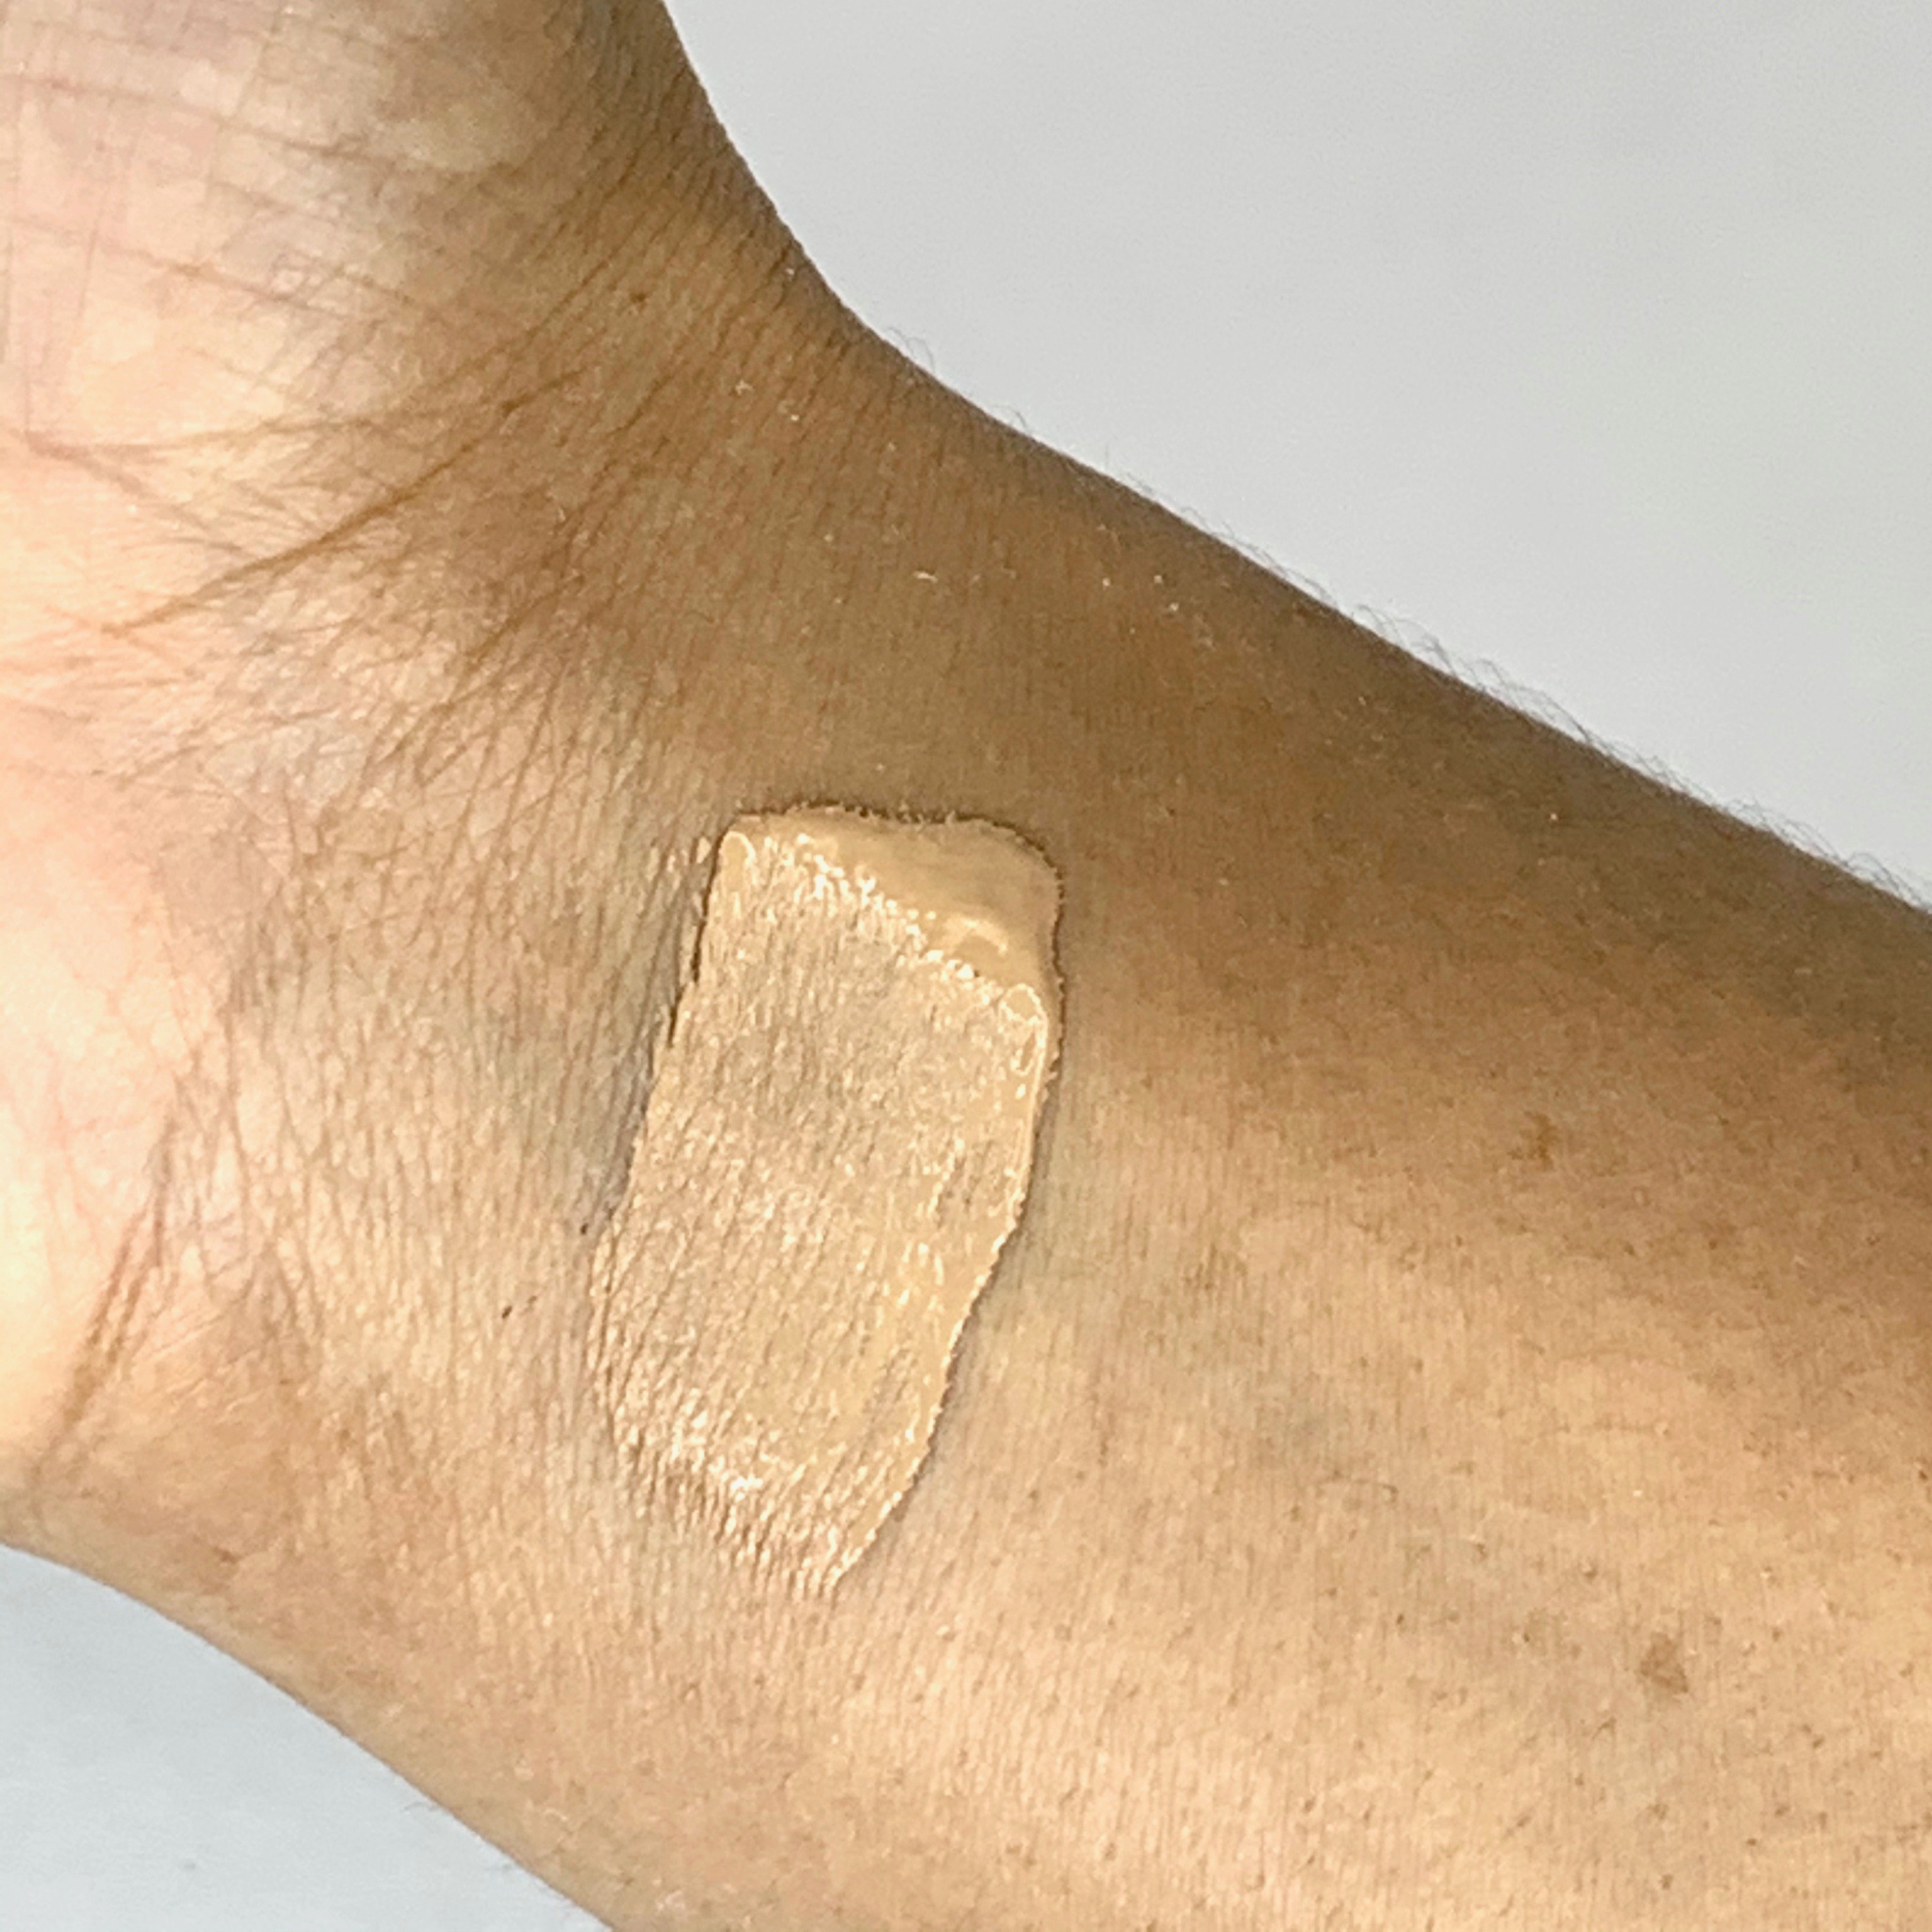 Kokie Cosmetics Be Bright Illuminating Concealer Swatch for Ipsy Glam Bag April 2020